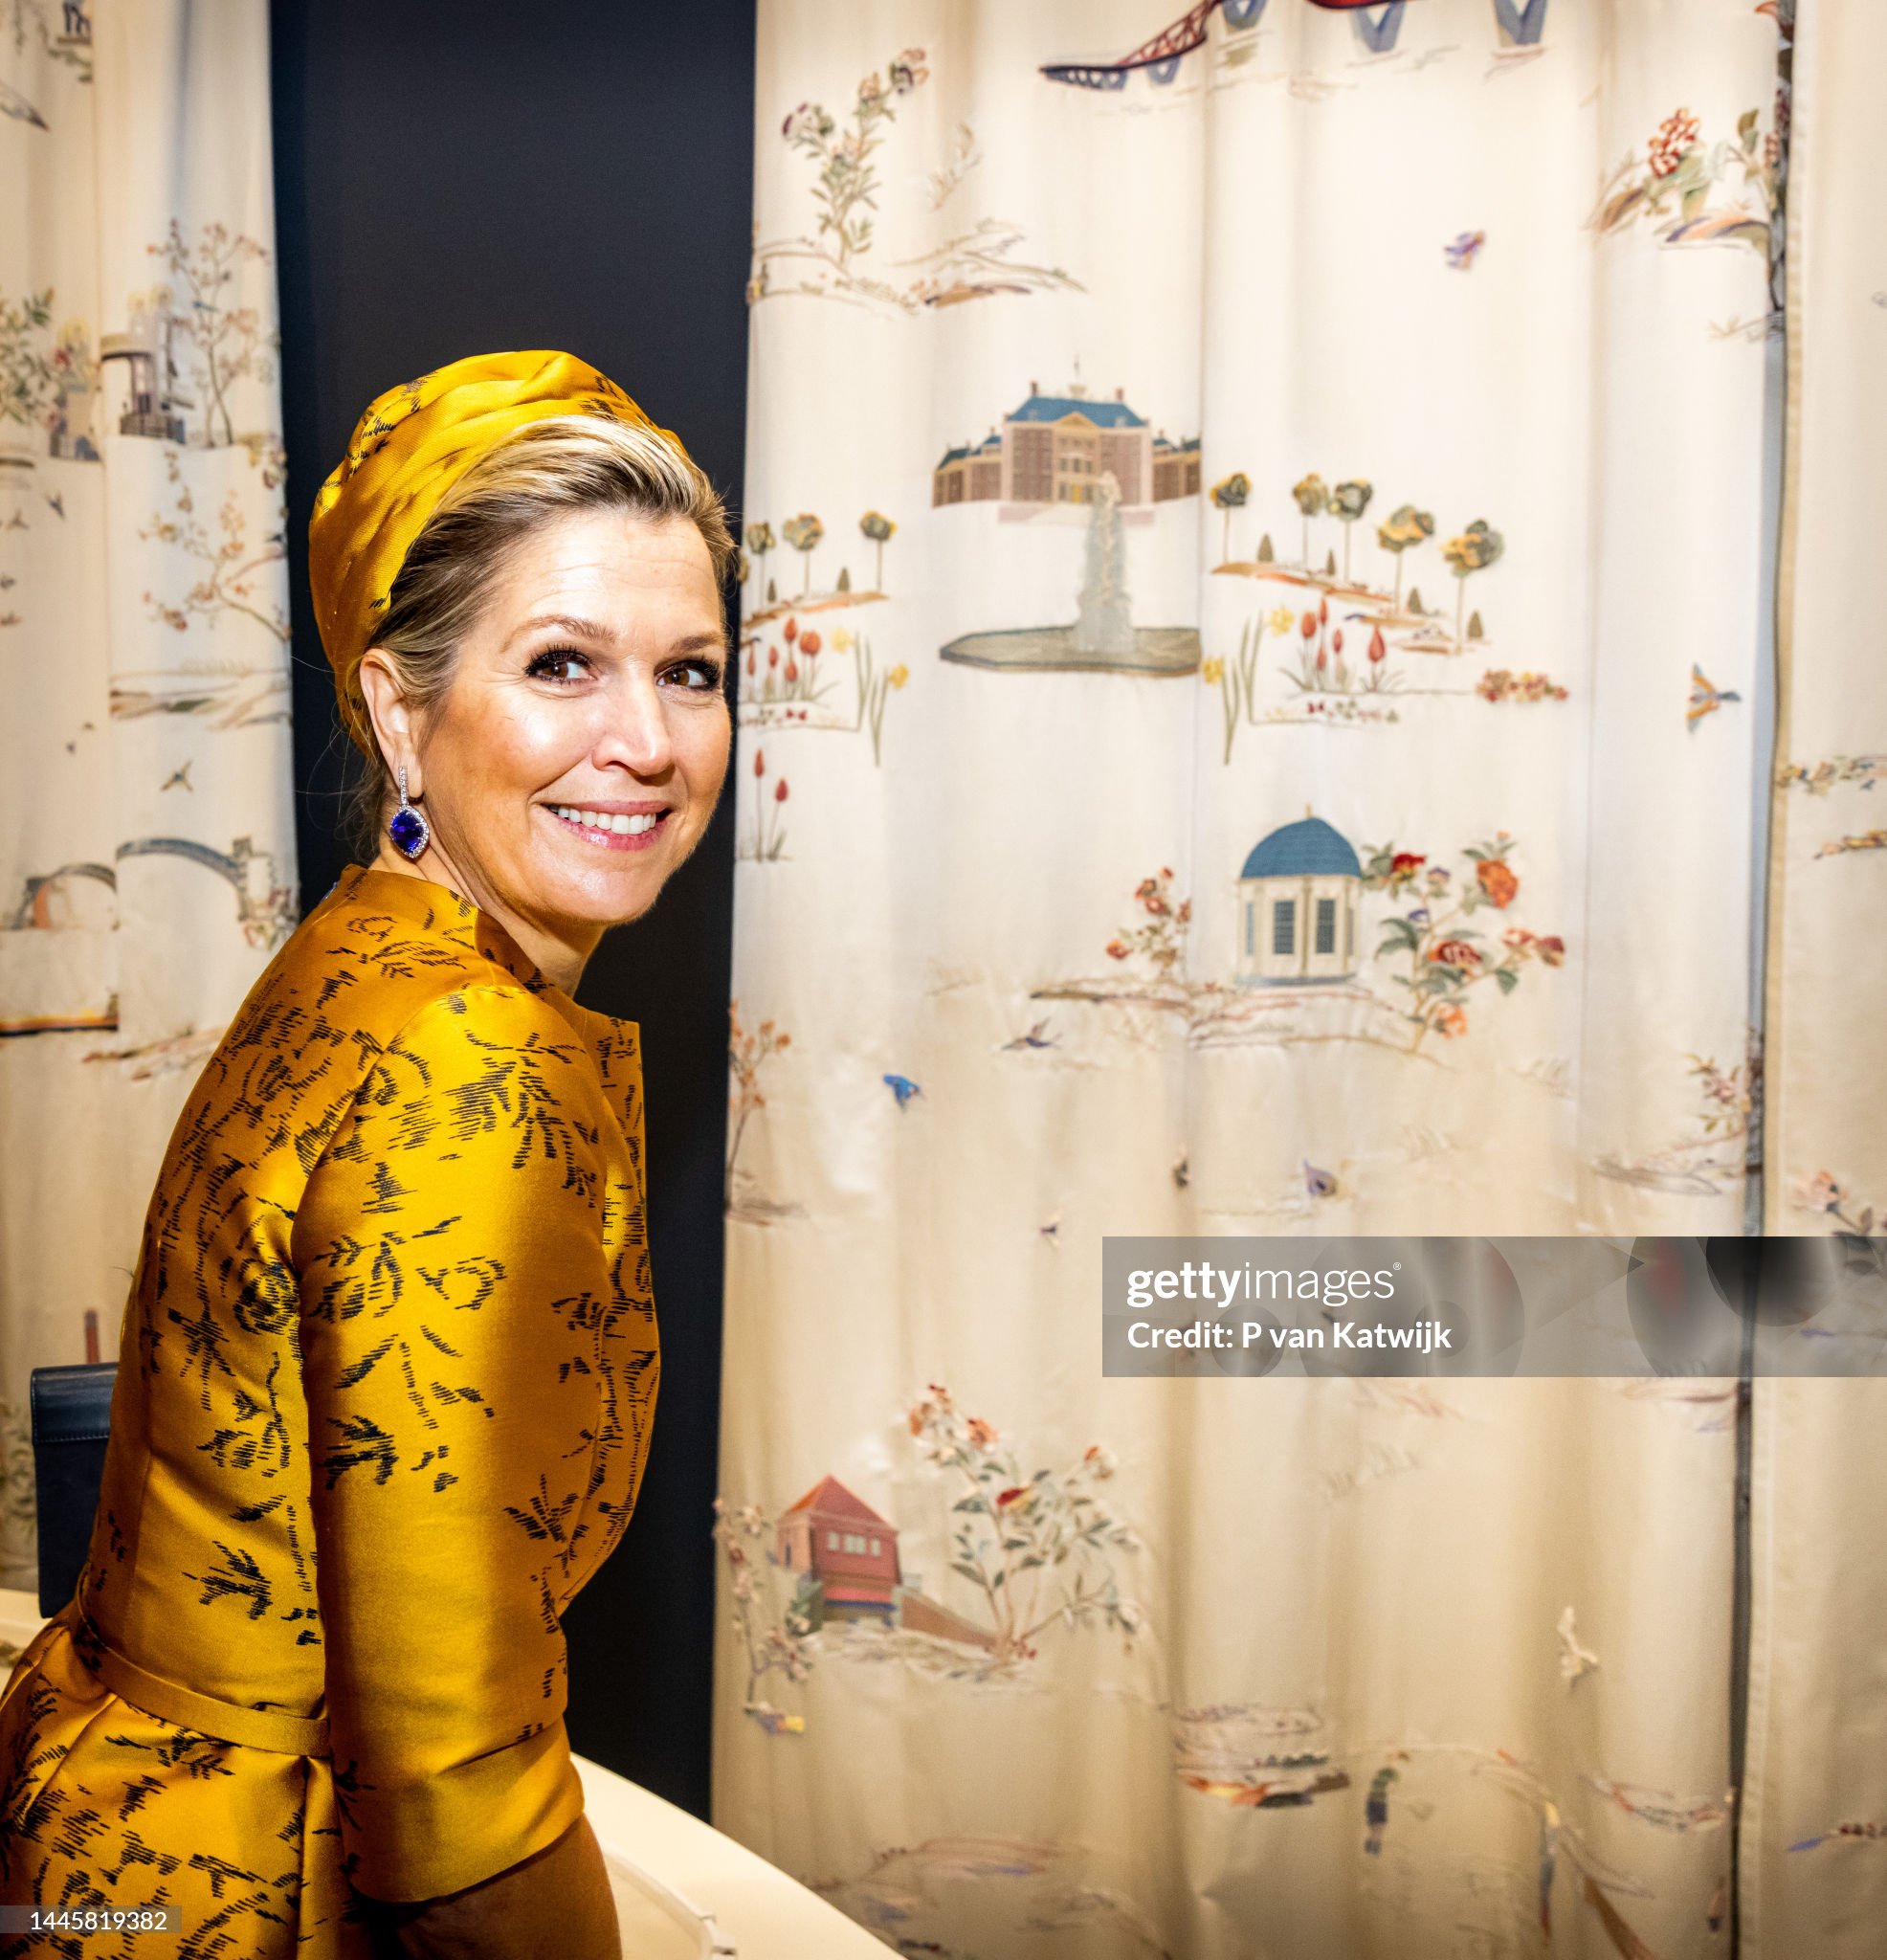 queen-maxima-of-the-netherlands-visits-textile-museum-to-present-her-new-curtains-for-palace.jpg?s=2048x2048&w=gi&k=20&c=nJ2K50C6oH311QlJI1m6-5ITIfpWu_XgPaB7yuyHVrQ=